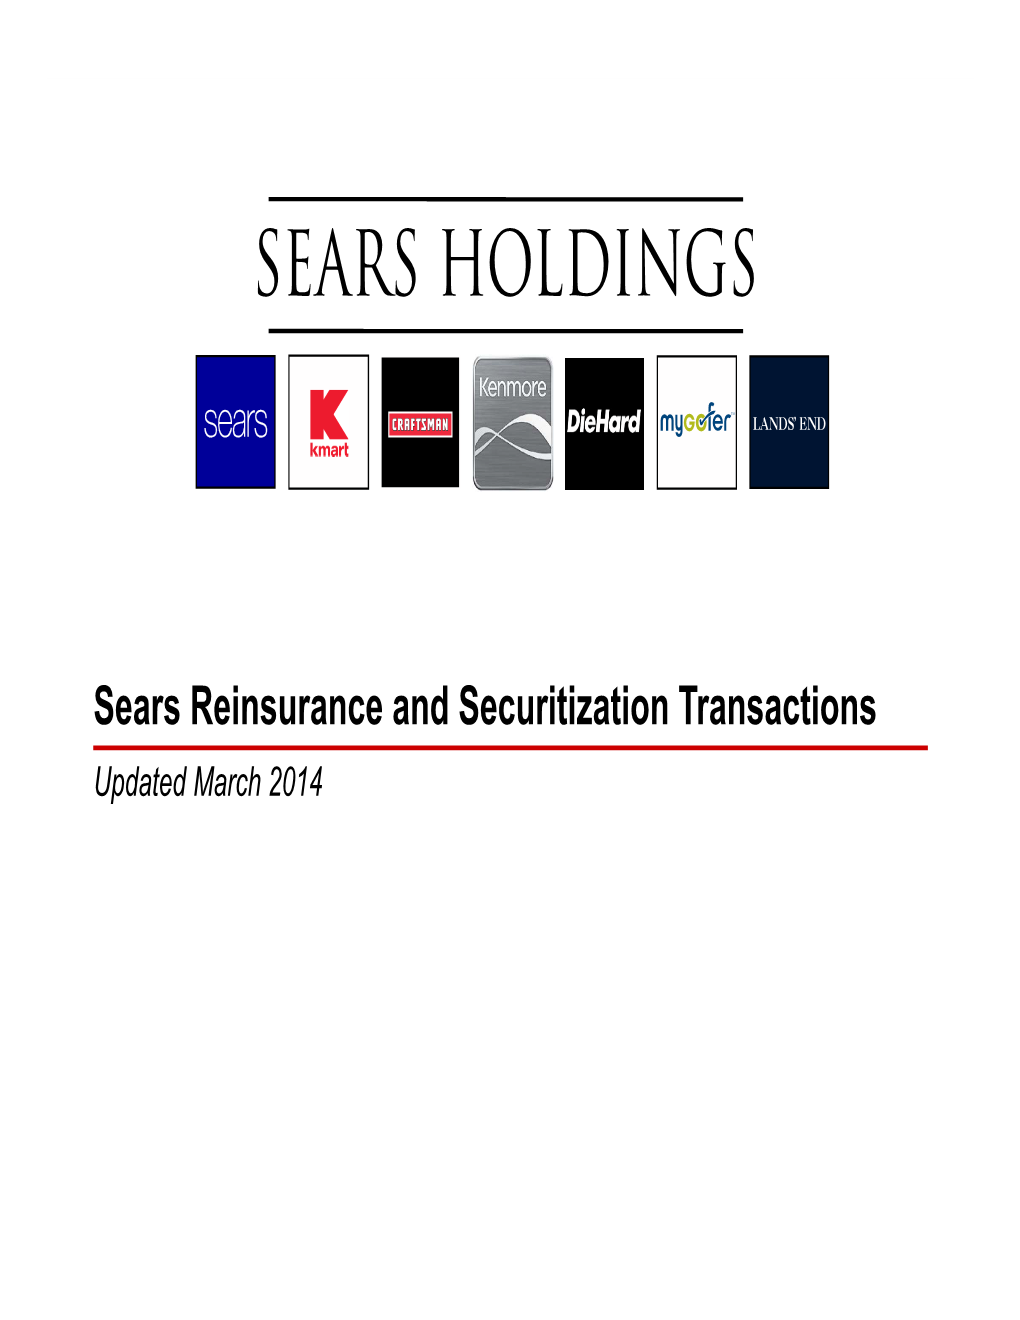 Sears Reinsurance and Securitization Transactions Updated March 2014 Summary